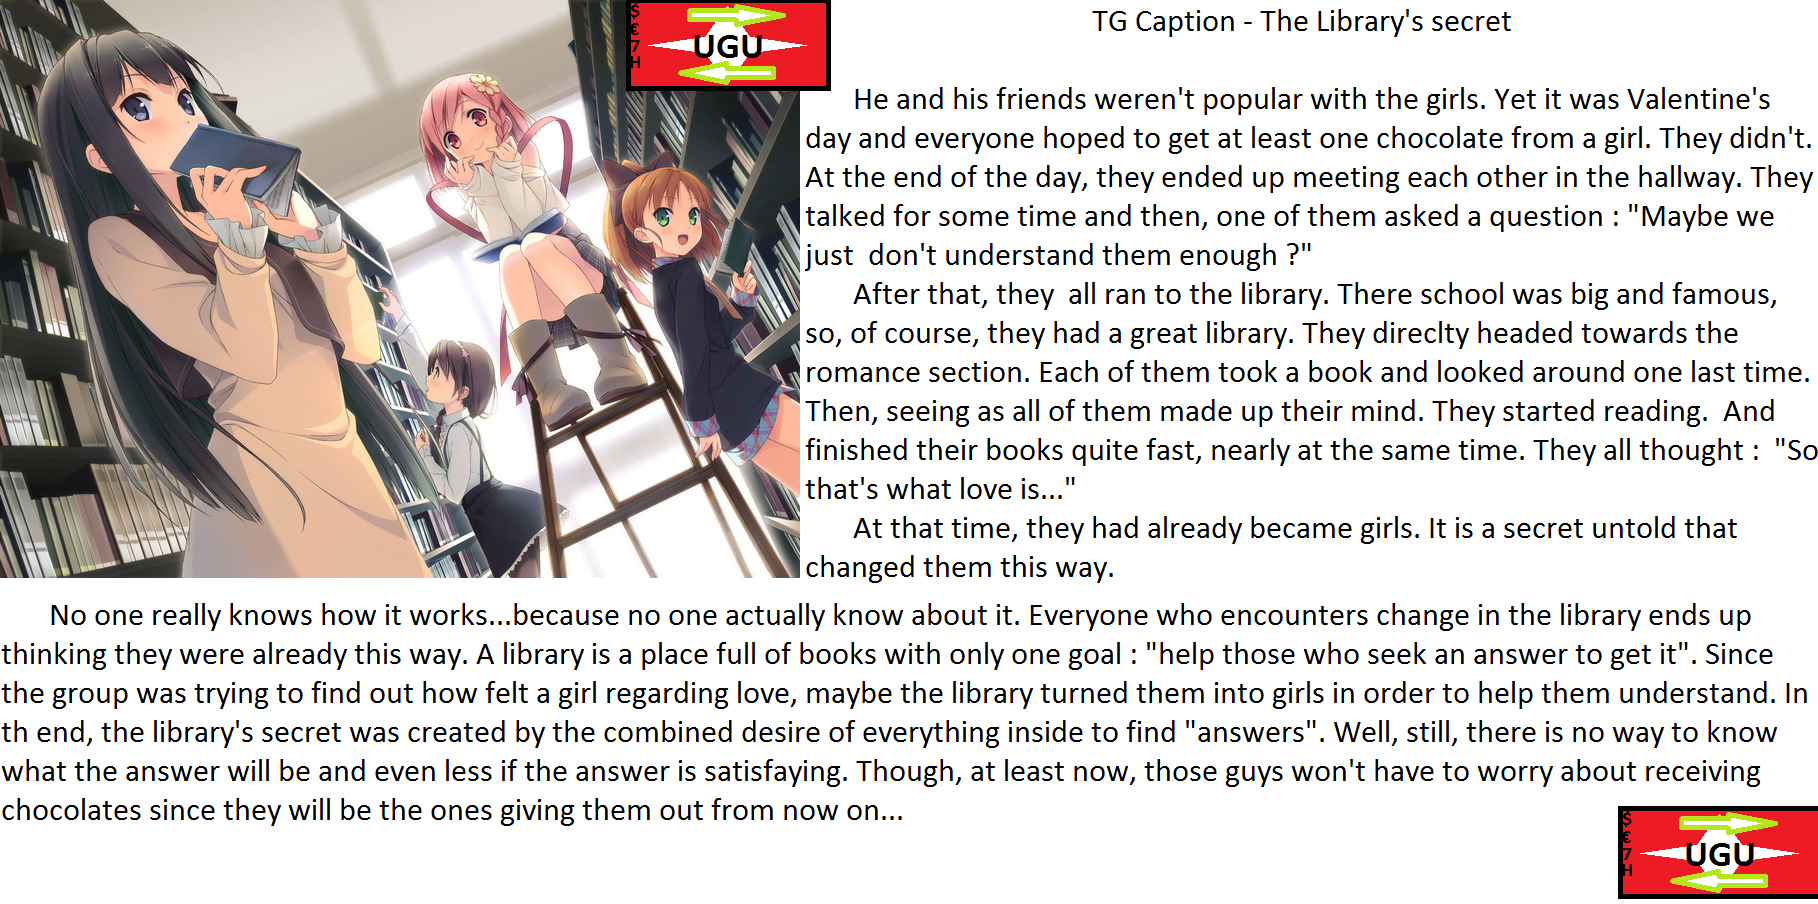 Tg Caption The Library S Secret By Ugu Deviant 2 On